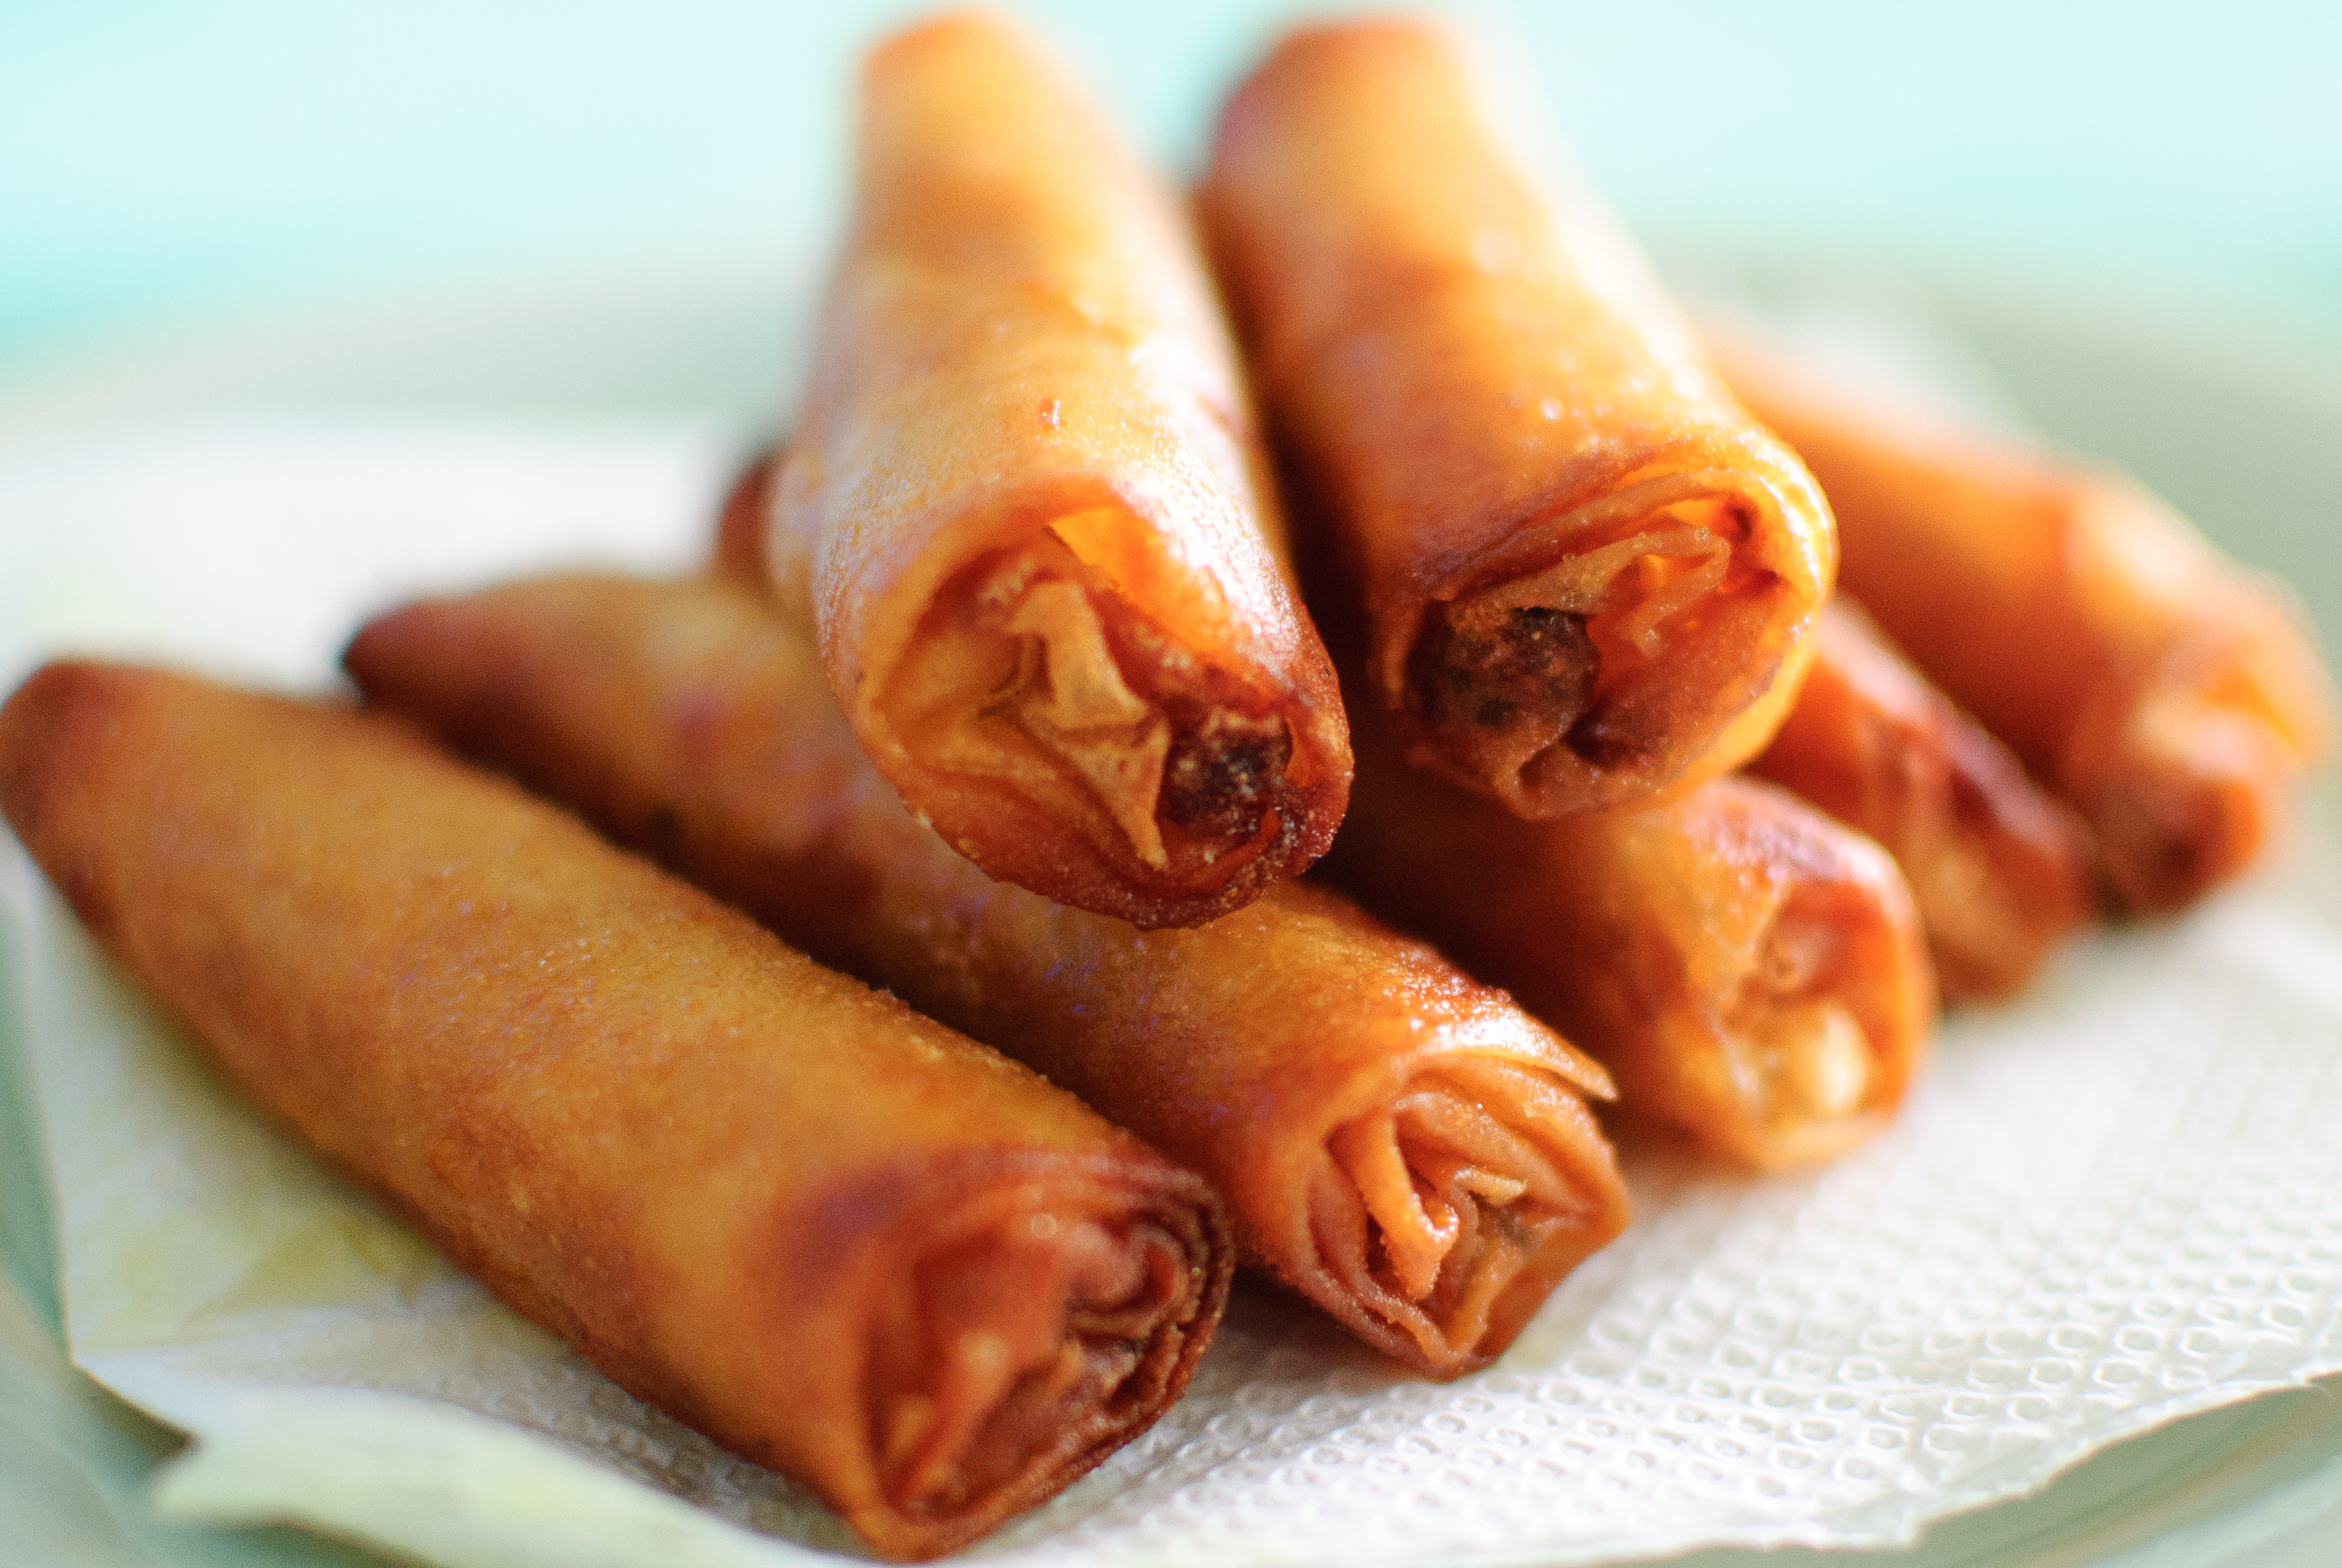 Dibang lumpia Photo by: wikihow